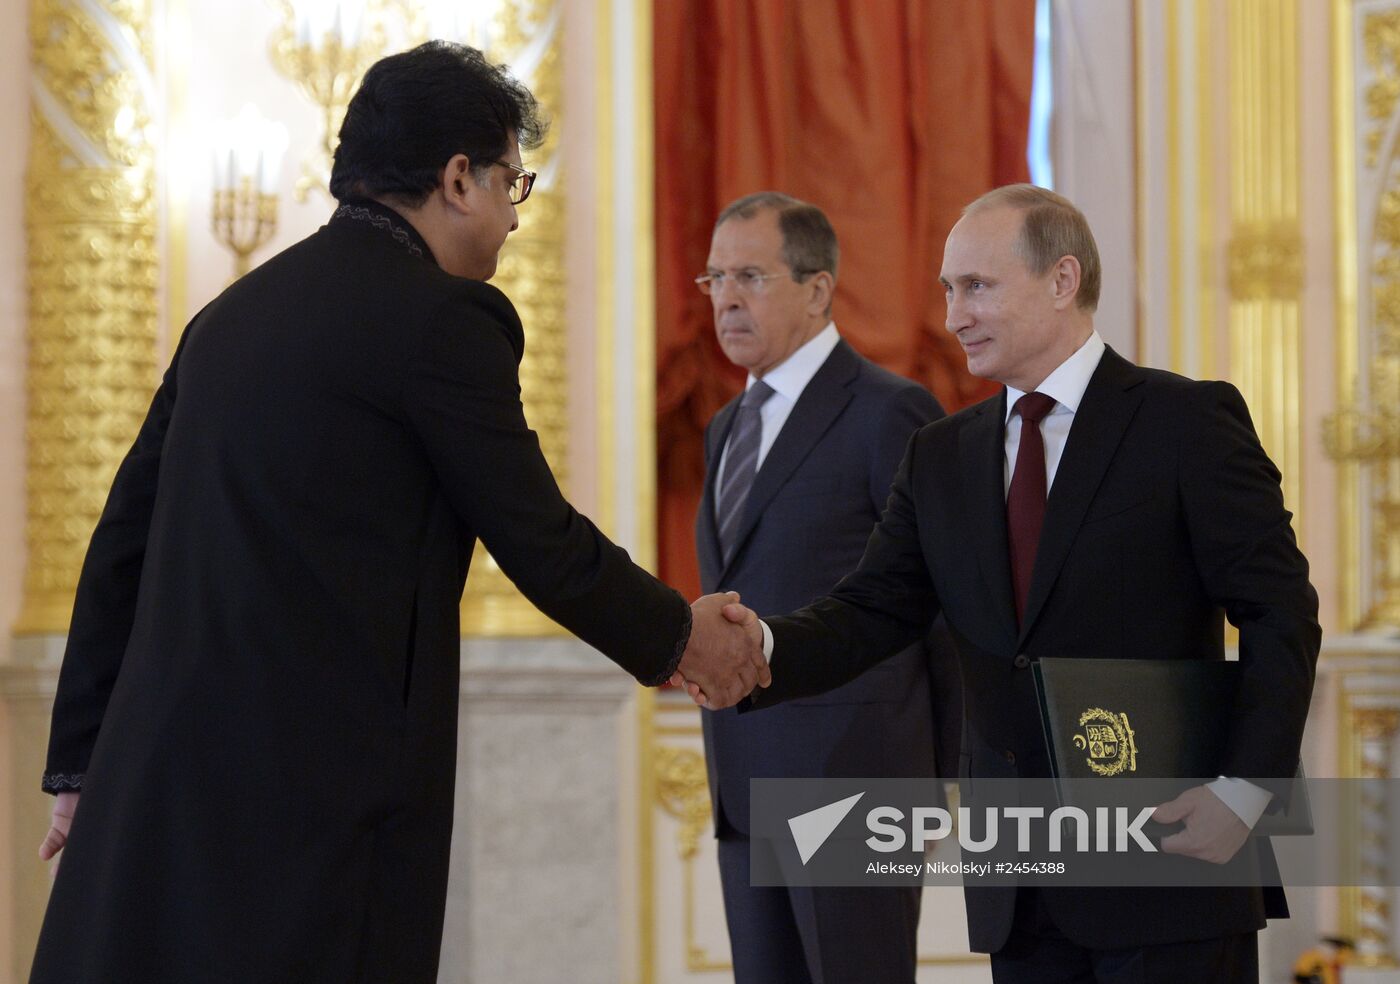 Ceremony of presenting credentials to Russian President Vladimir Putin